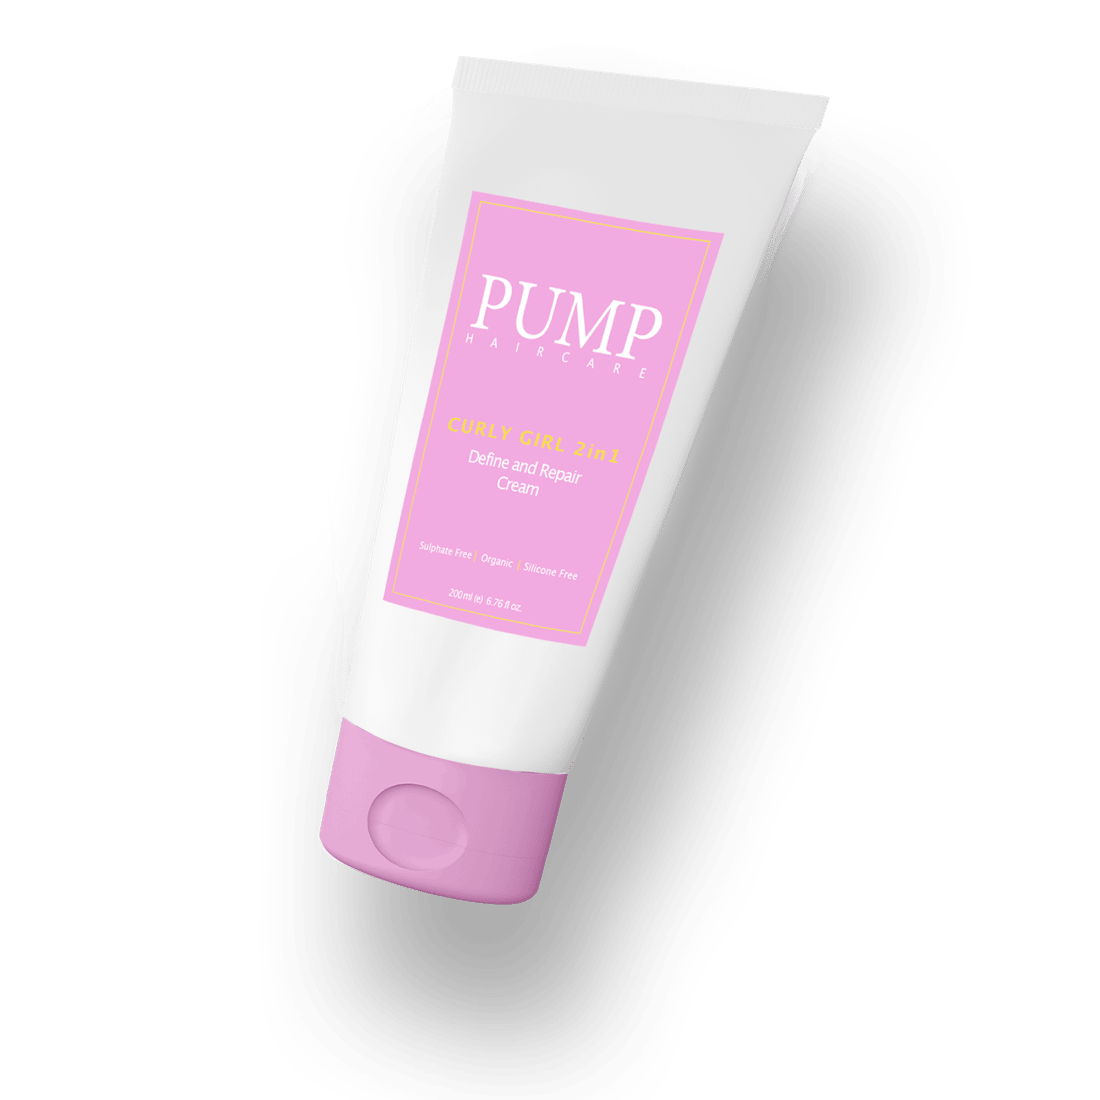 Pump Haircare Curly Girl 2 in1 Define and Repair Cream 200ml